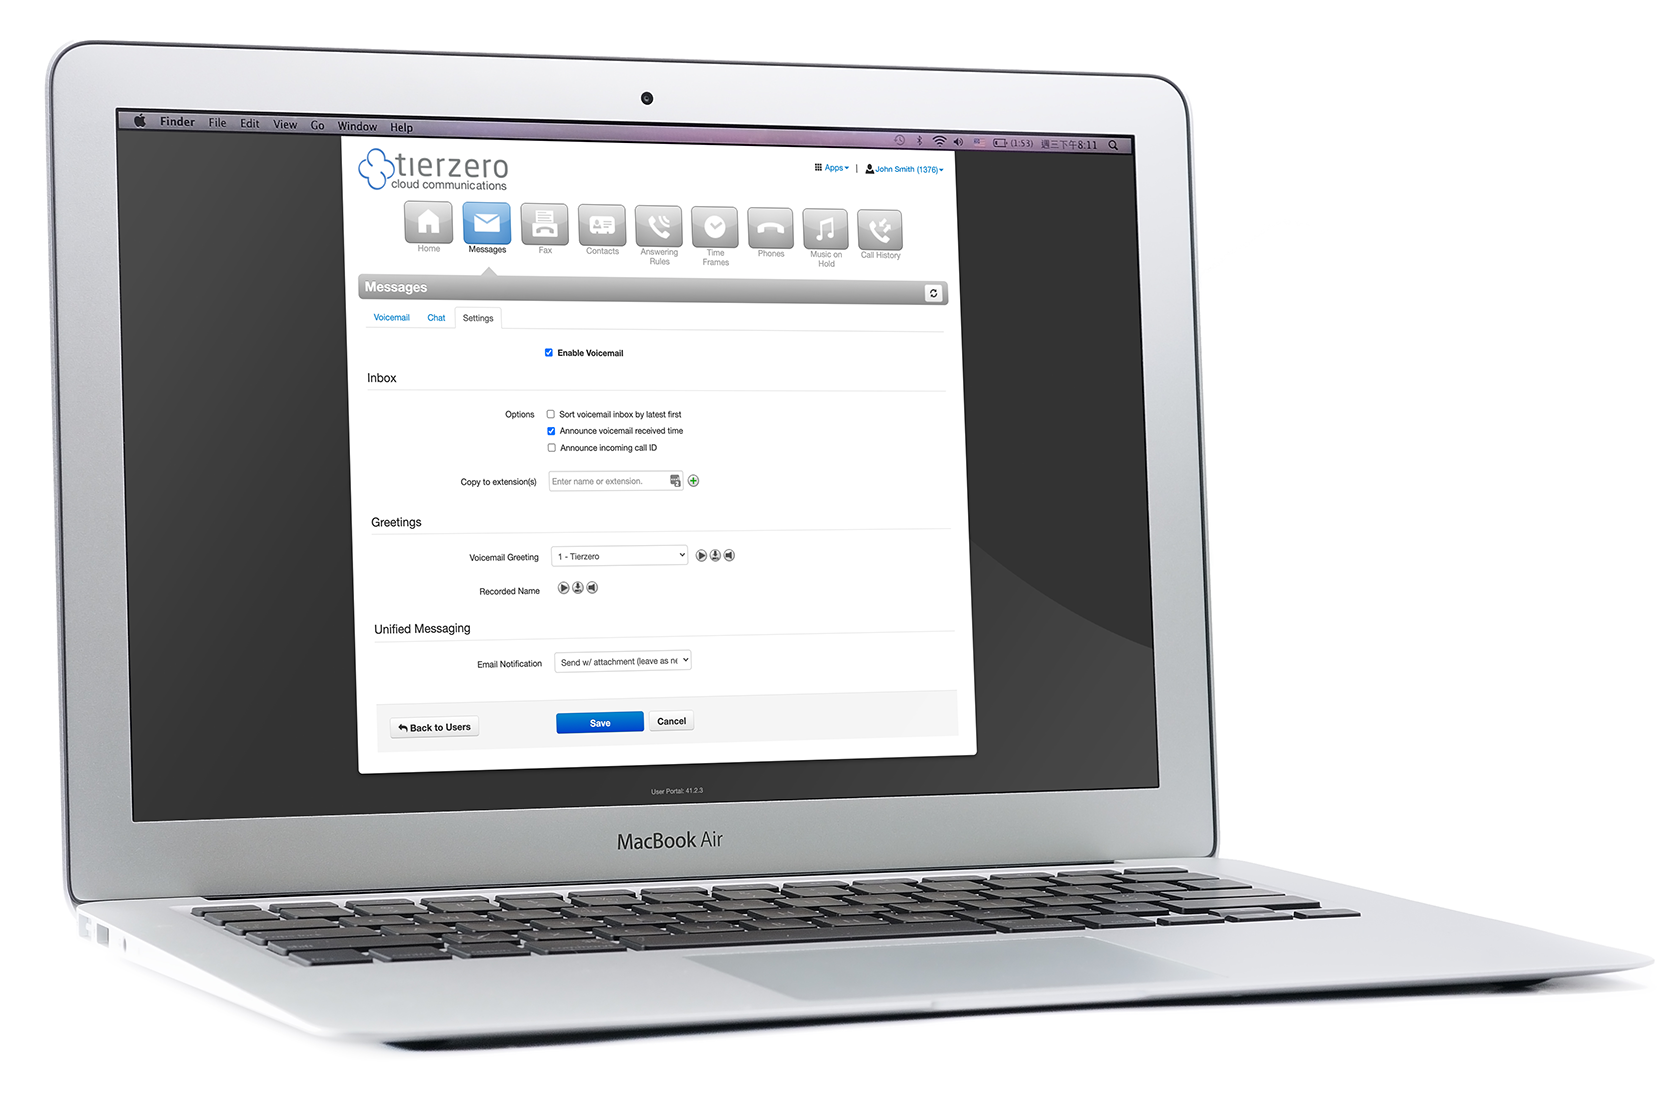 Tierzero web console for an easy-to-use phone system you can access from anywhere